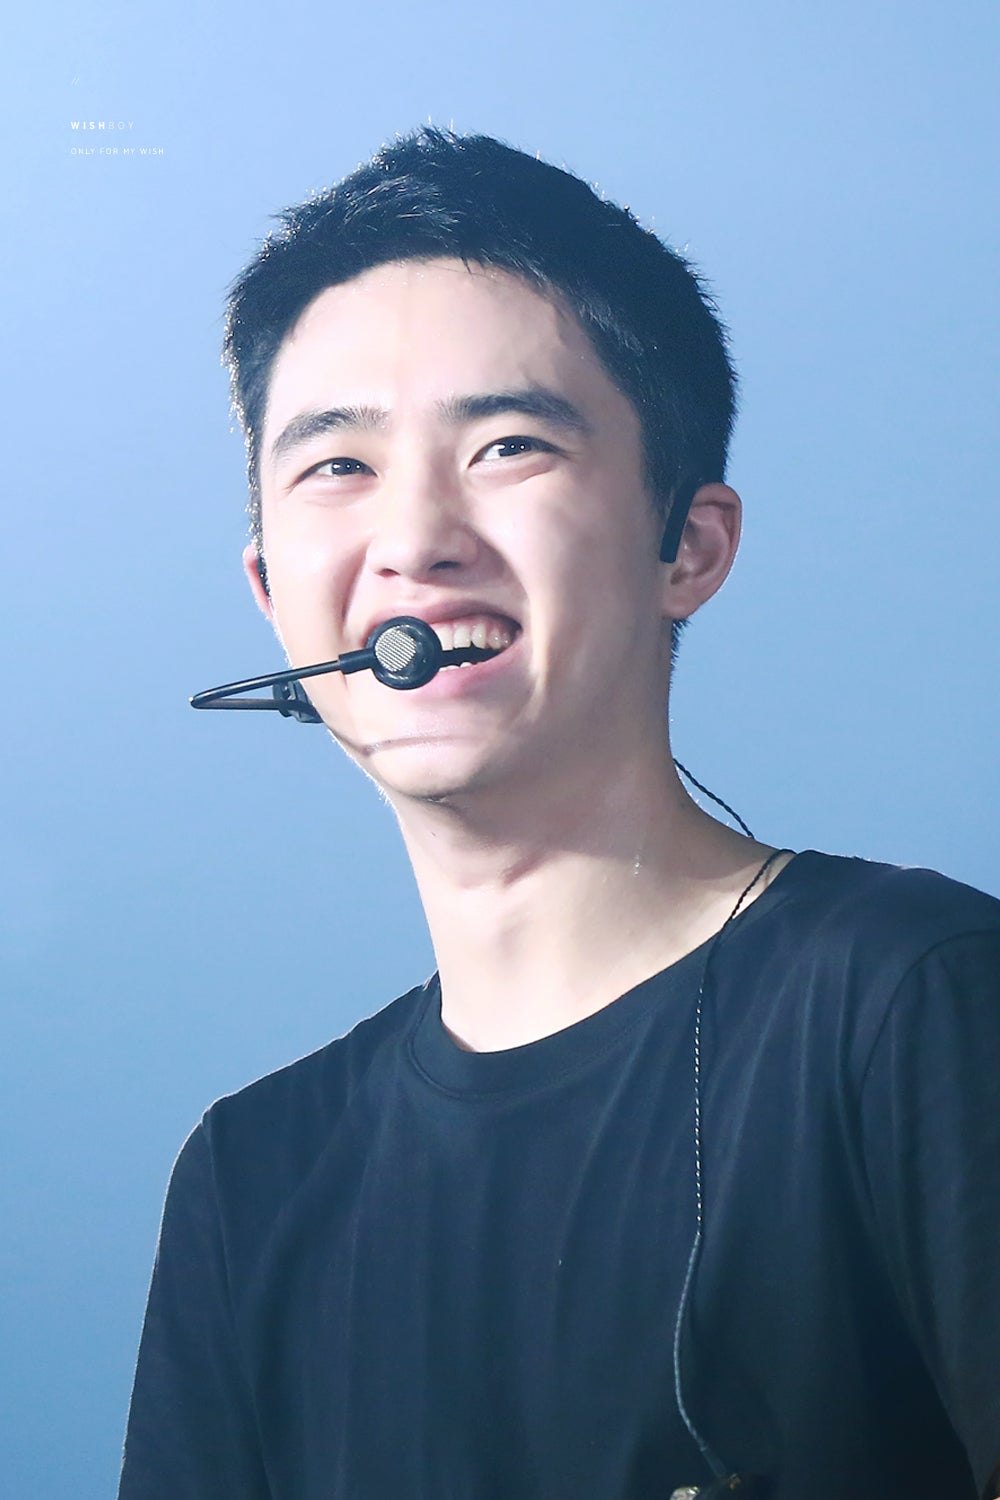 HQ] 7/23＆24 EXO'rDIUM in ソウル | Special Voice ～EXO D.O. ギョンス～